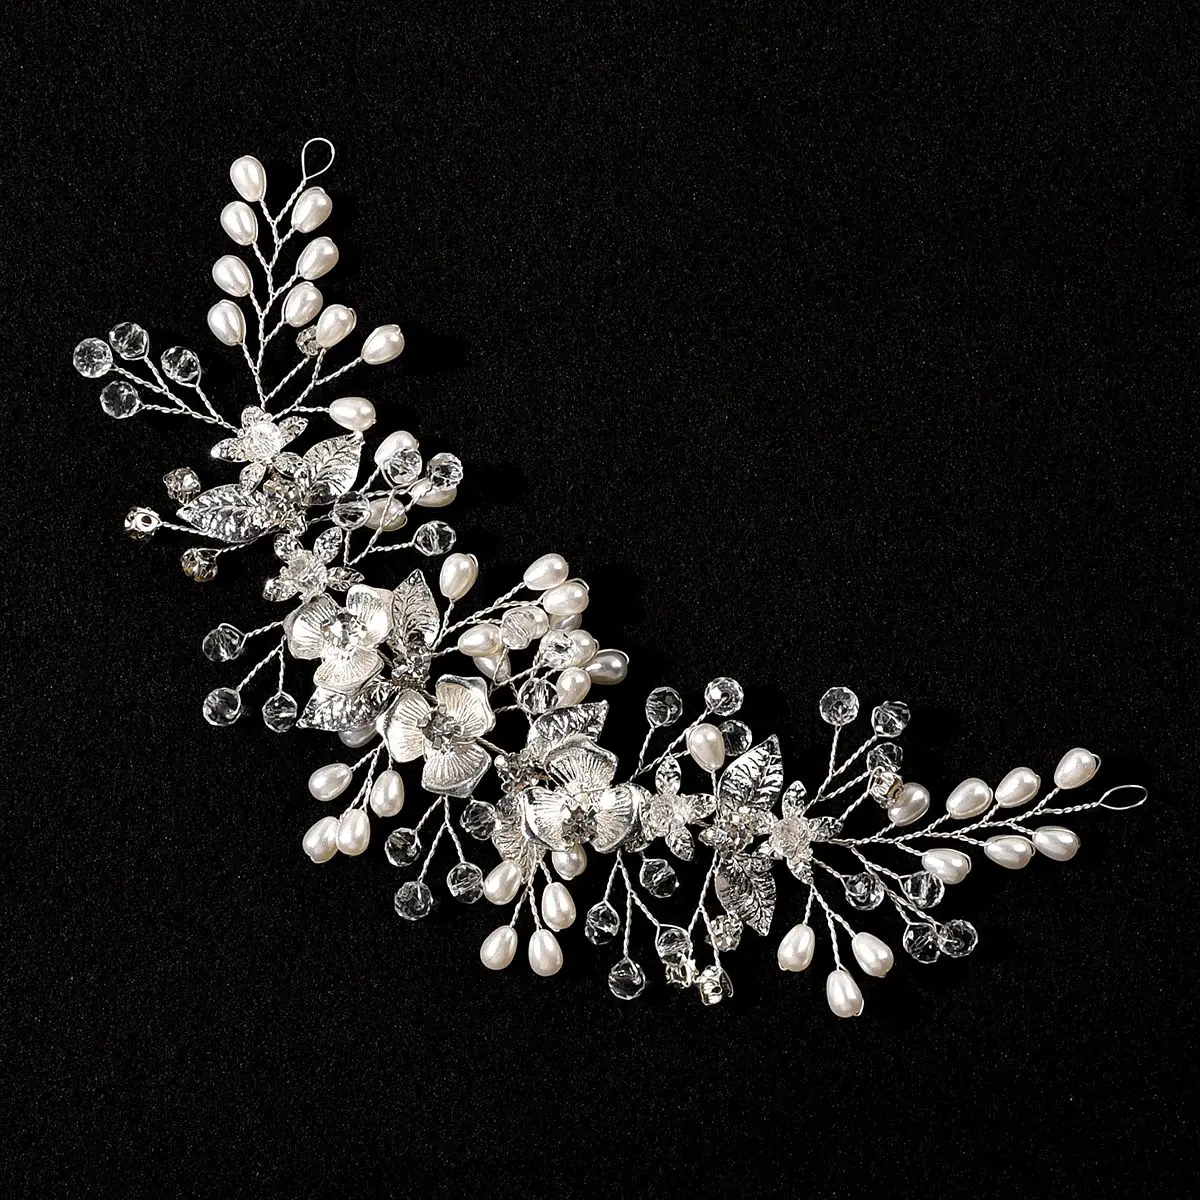 

Silver Color Pearl Crystal Wedding Hair Combs Hair Accessories for Bridal Flower Headpiece Women Bride Hair ornaments Jewelry